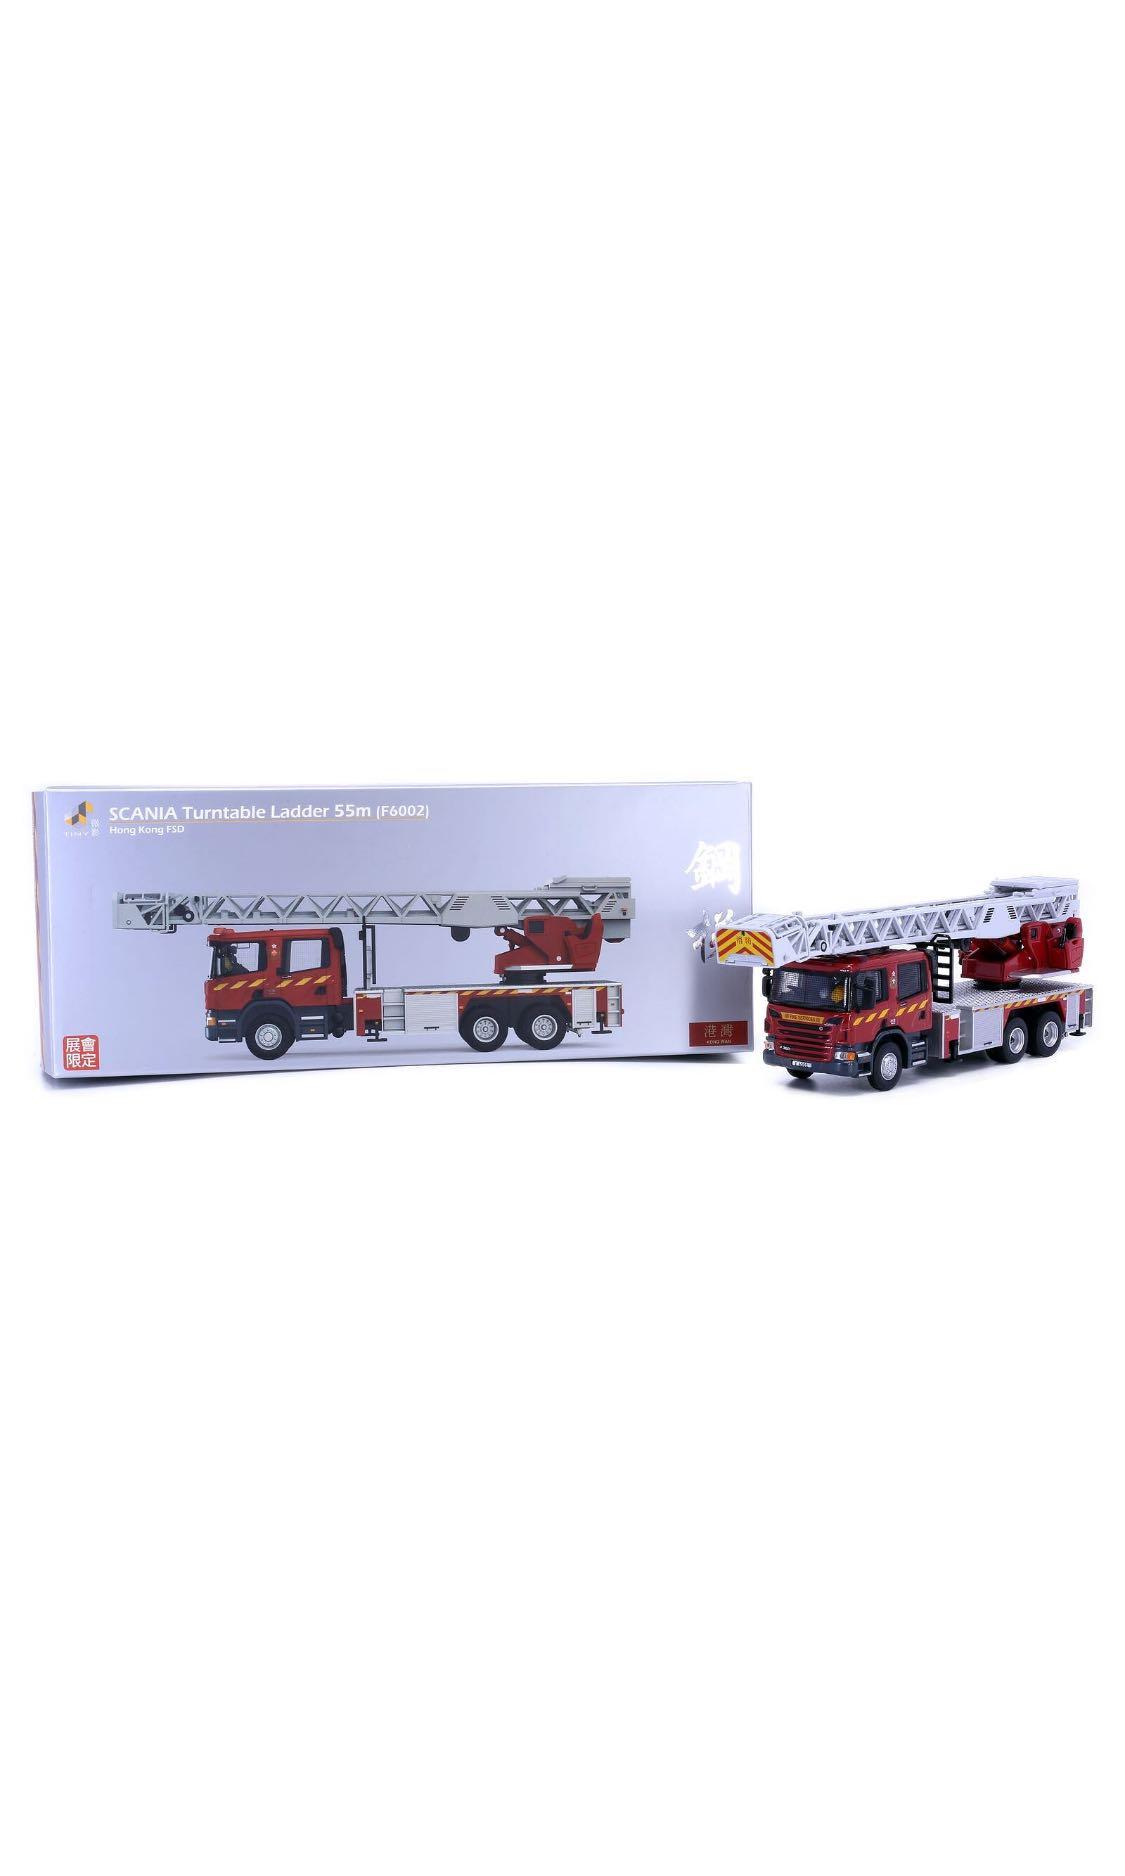 Tiny Scania Turntable Ladder 55m F6002 Hong Kong Fire Service Limited Edition 